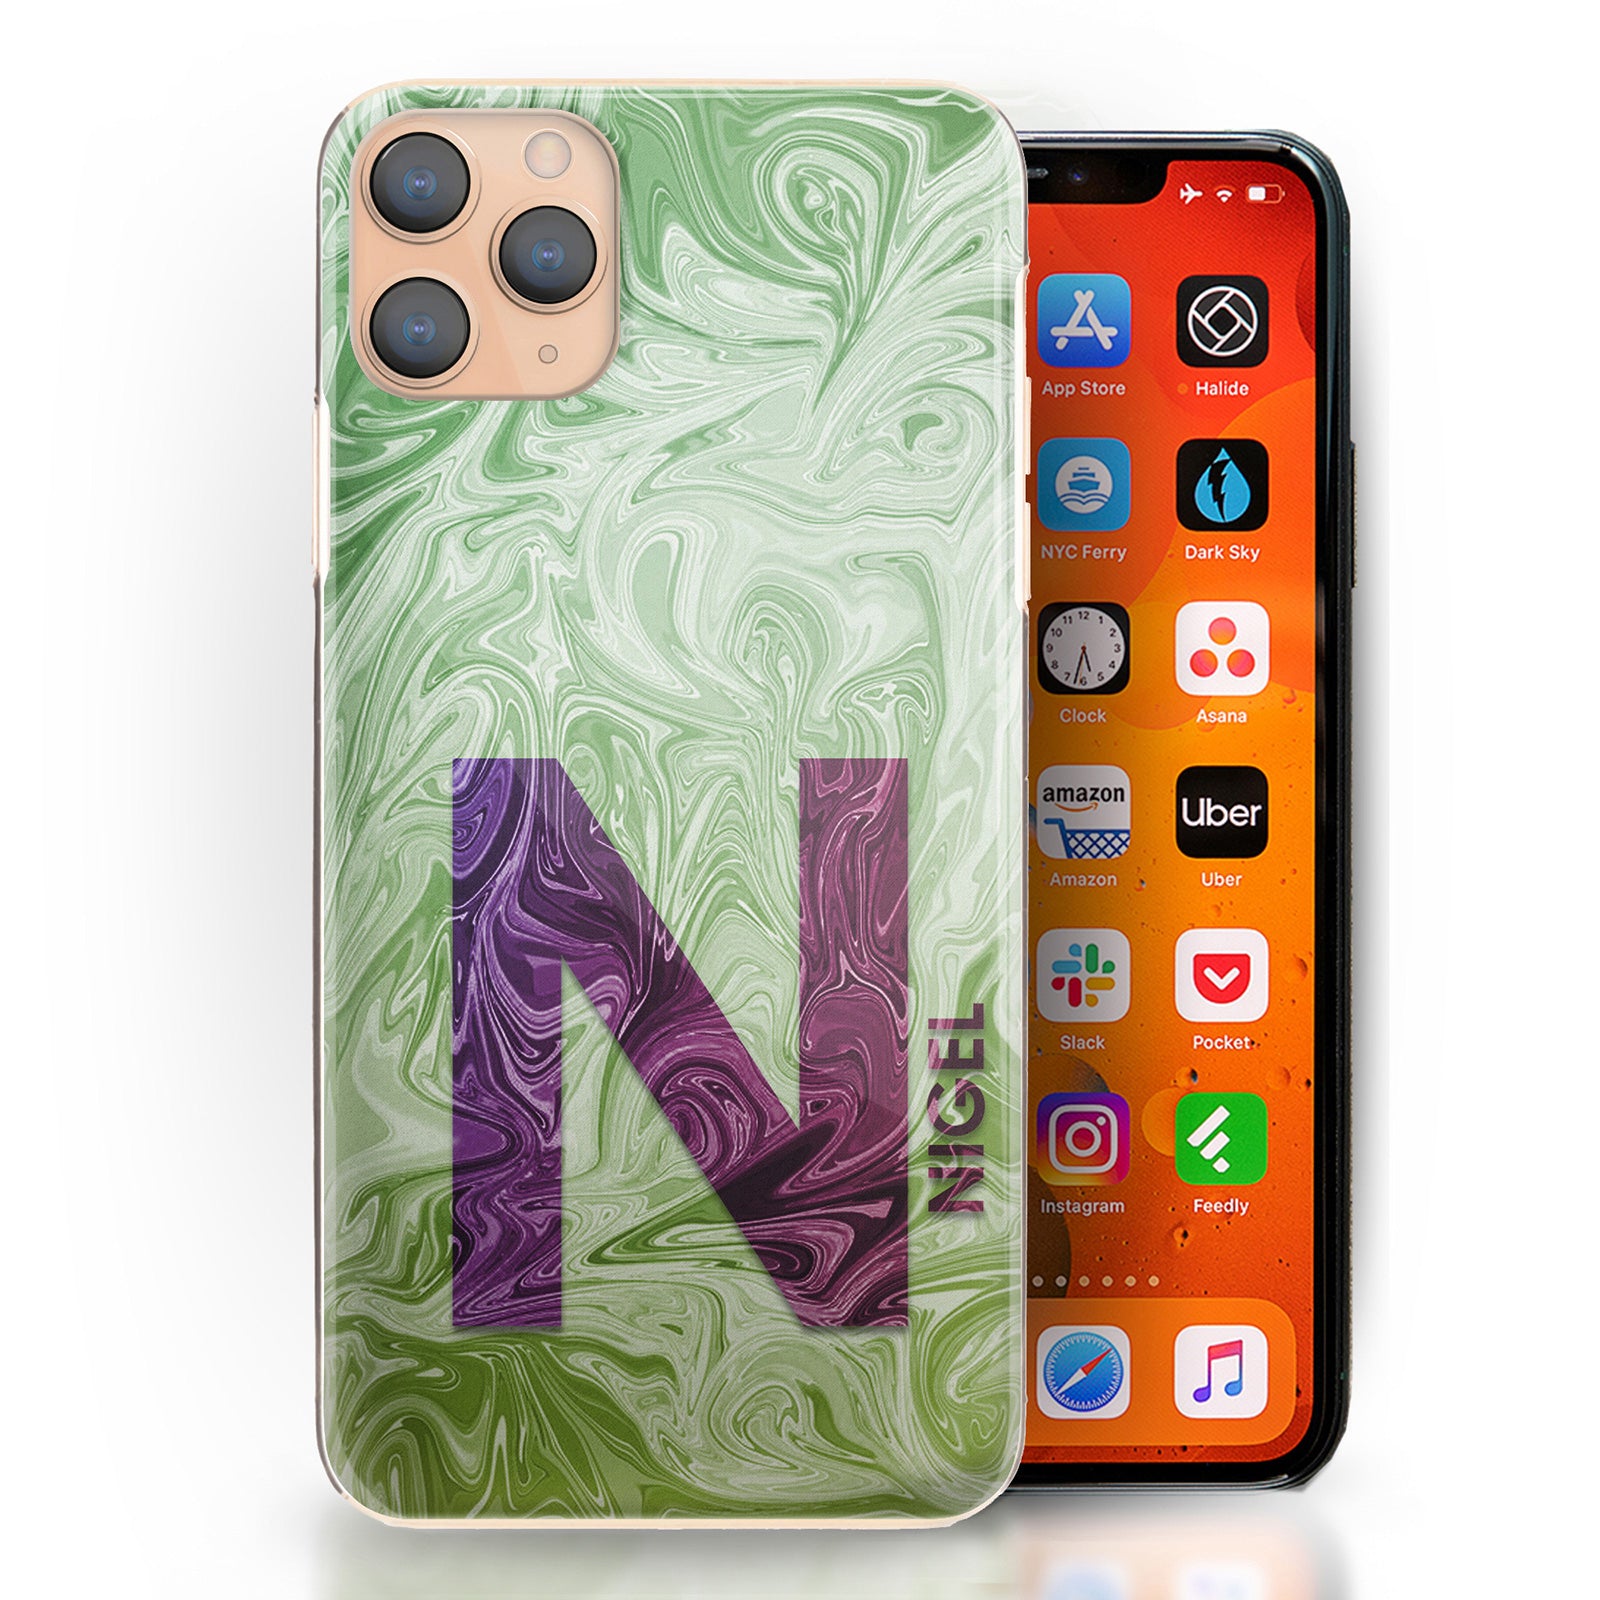 Personalised Xiaomi Phone Hard Case with Purple Text and Initial on Green Swirled Marble